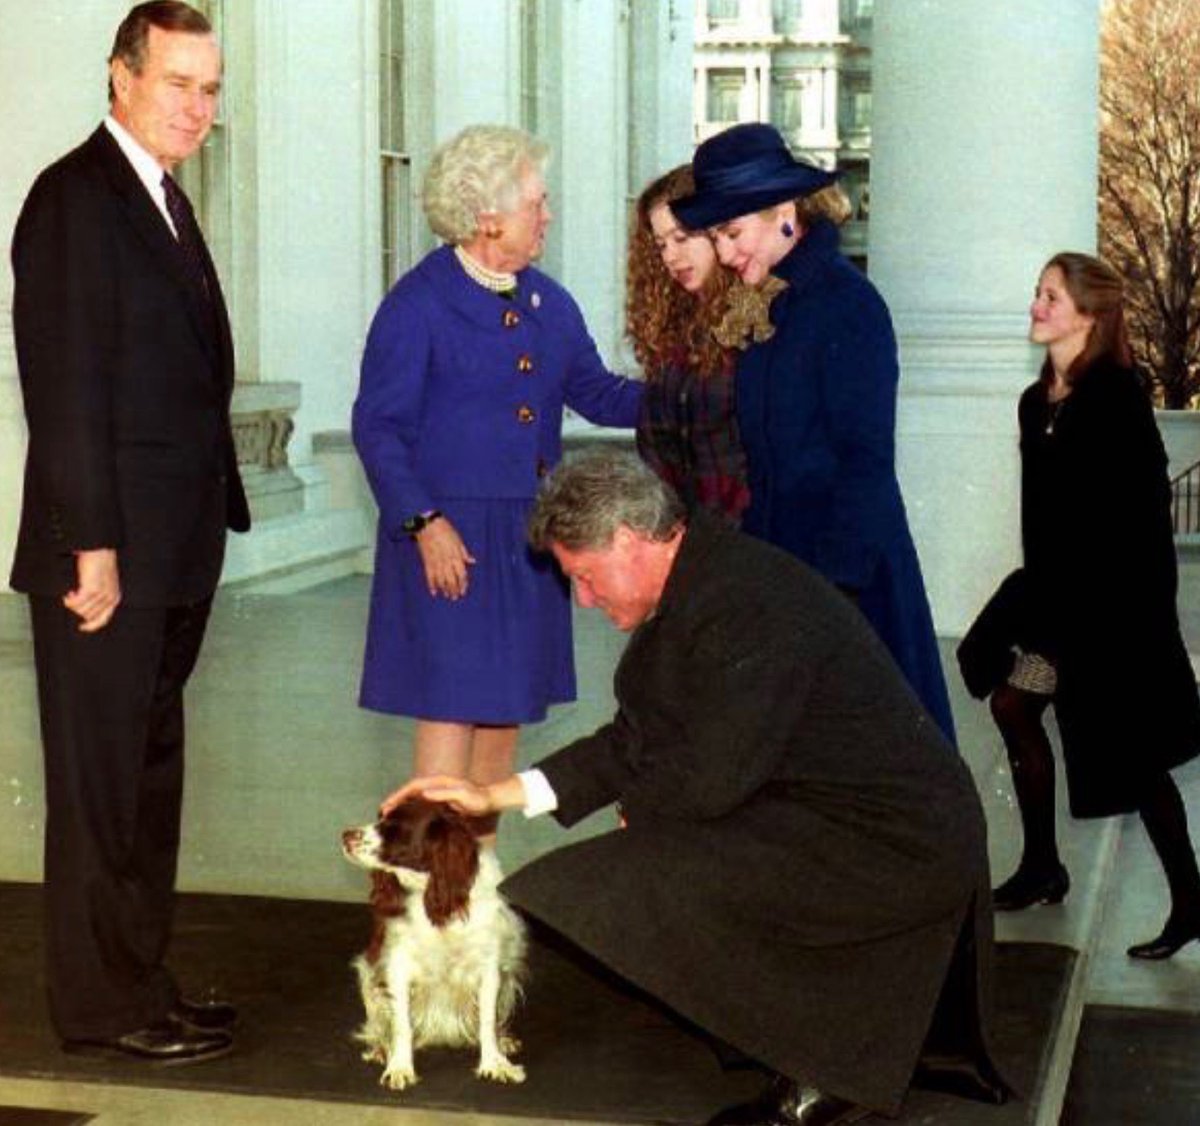 When Clintons arrived at White House on inaugural day 1993, President George H.W. Bush said, “Welcome to your new home!'